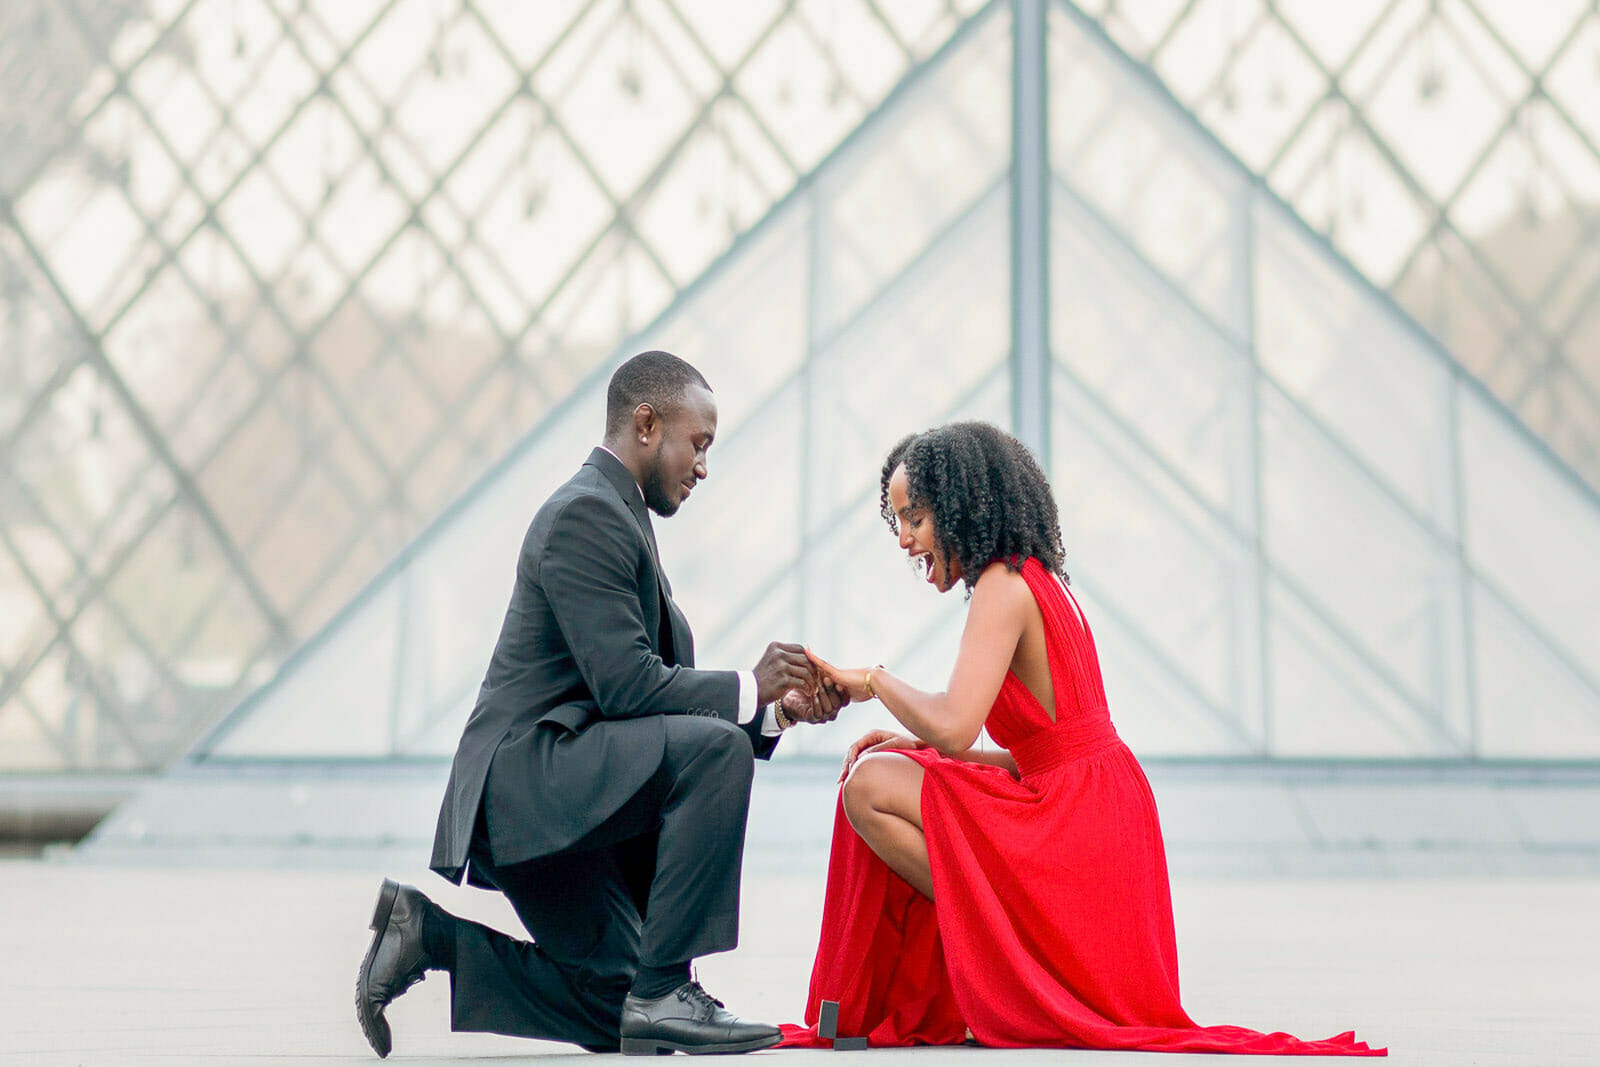 Paris proposal in front of the pyramid of the Louvre Museum